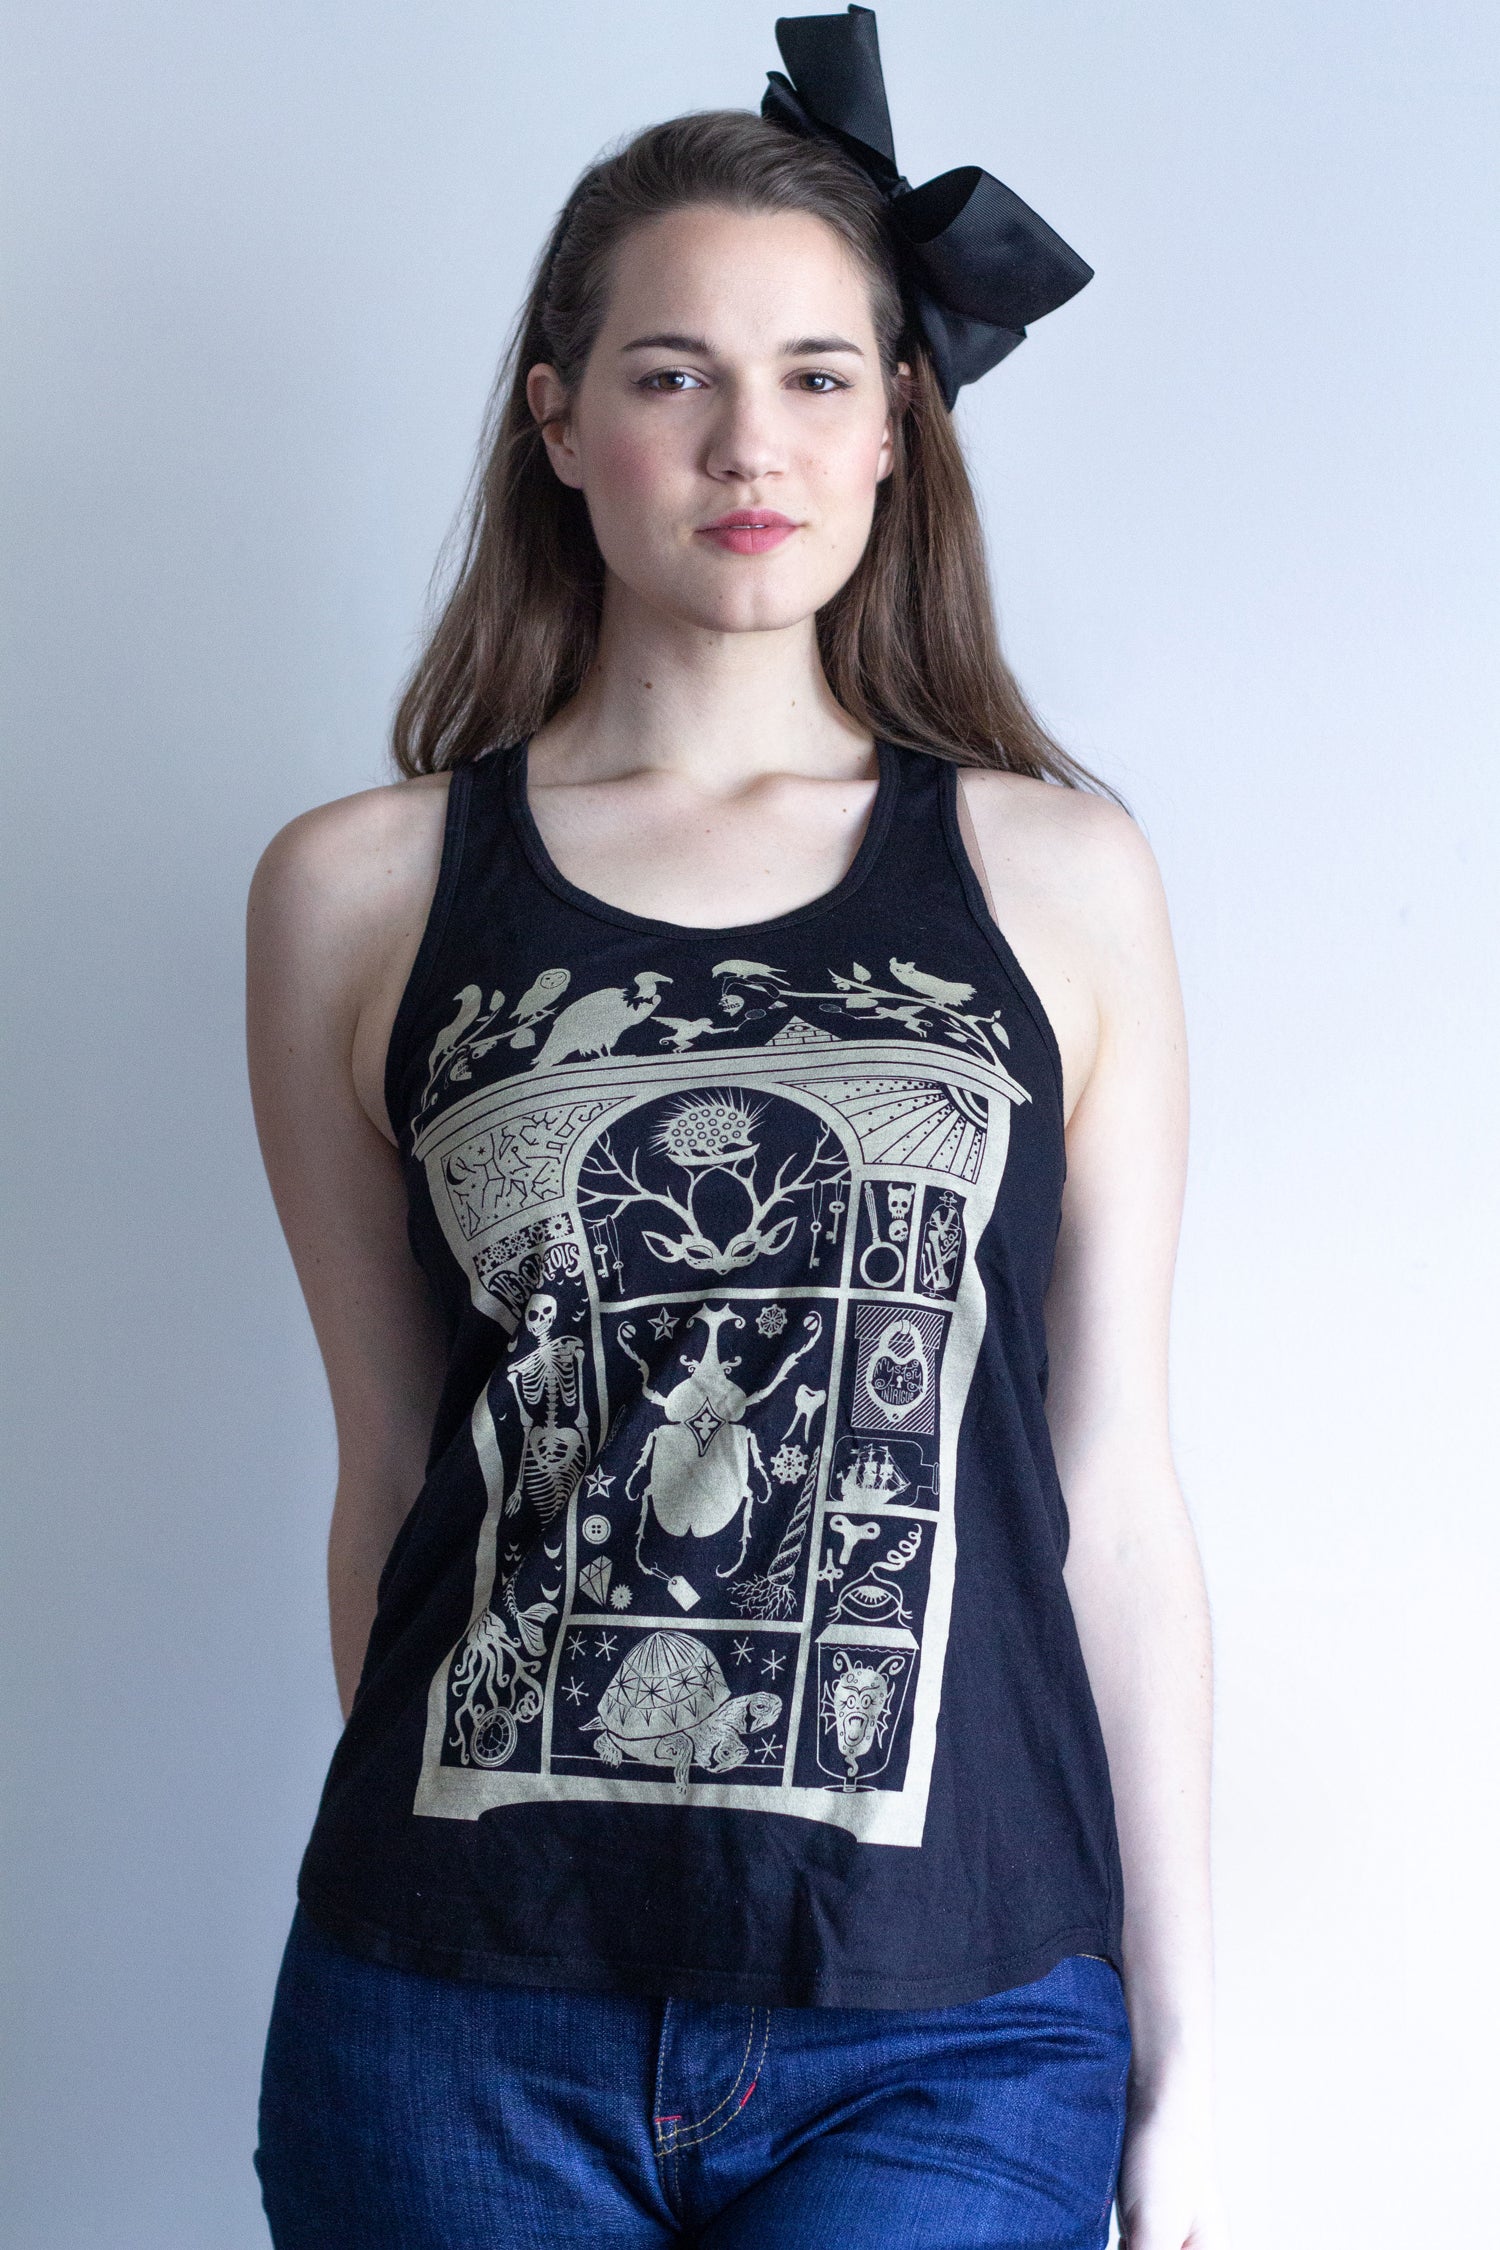 Black racerback tank with off-white print of cabinet of curiosities with beetle, skeletons, owls